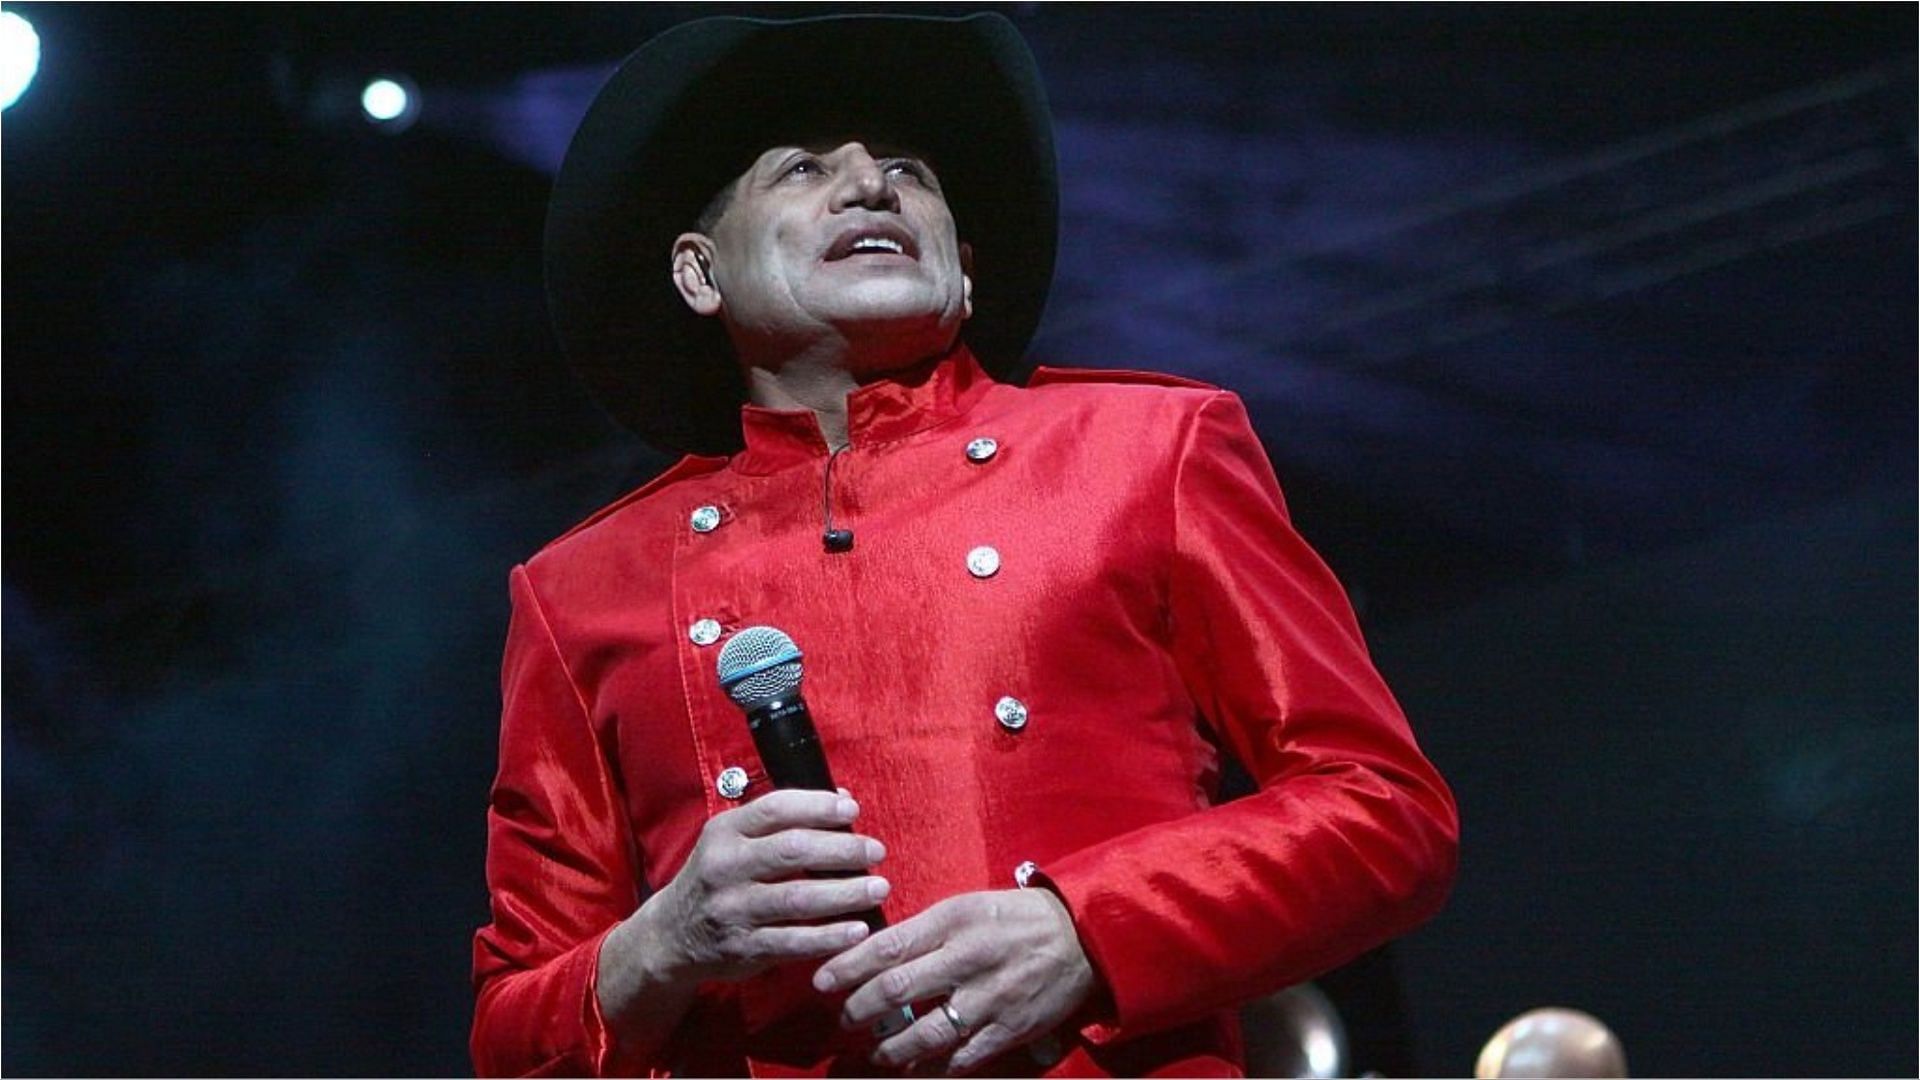 Pancho Barraza has released many albums and singles over the years (Image via JC Olivera/Getty Images)